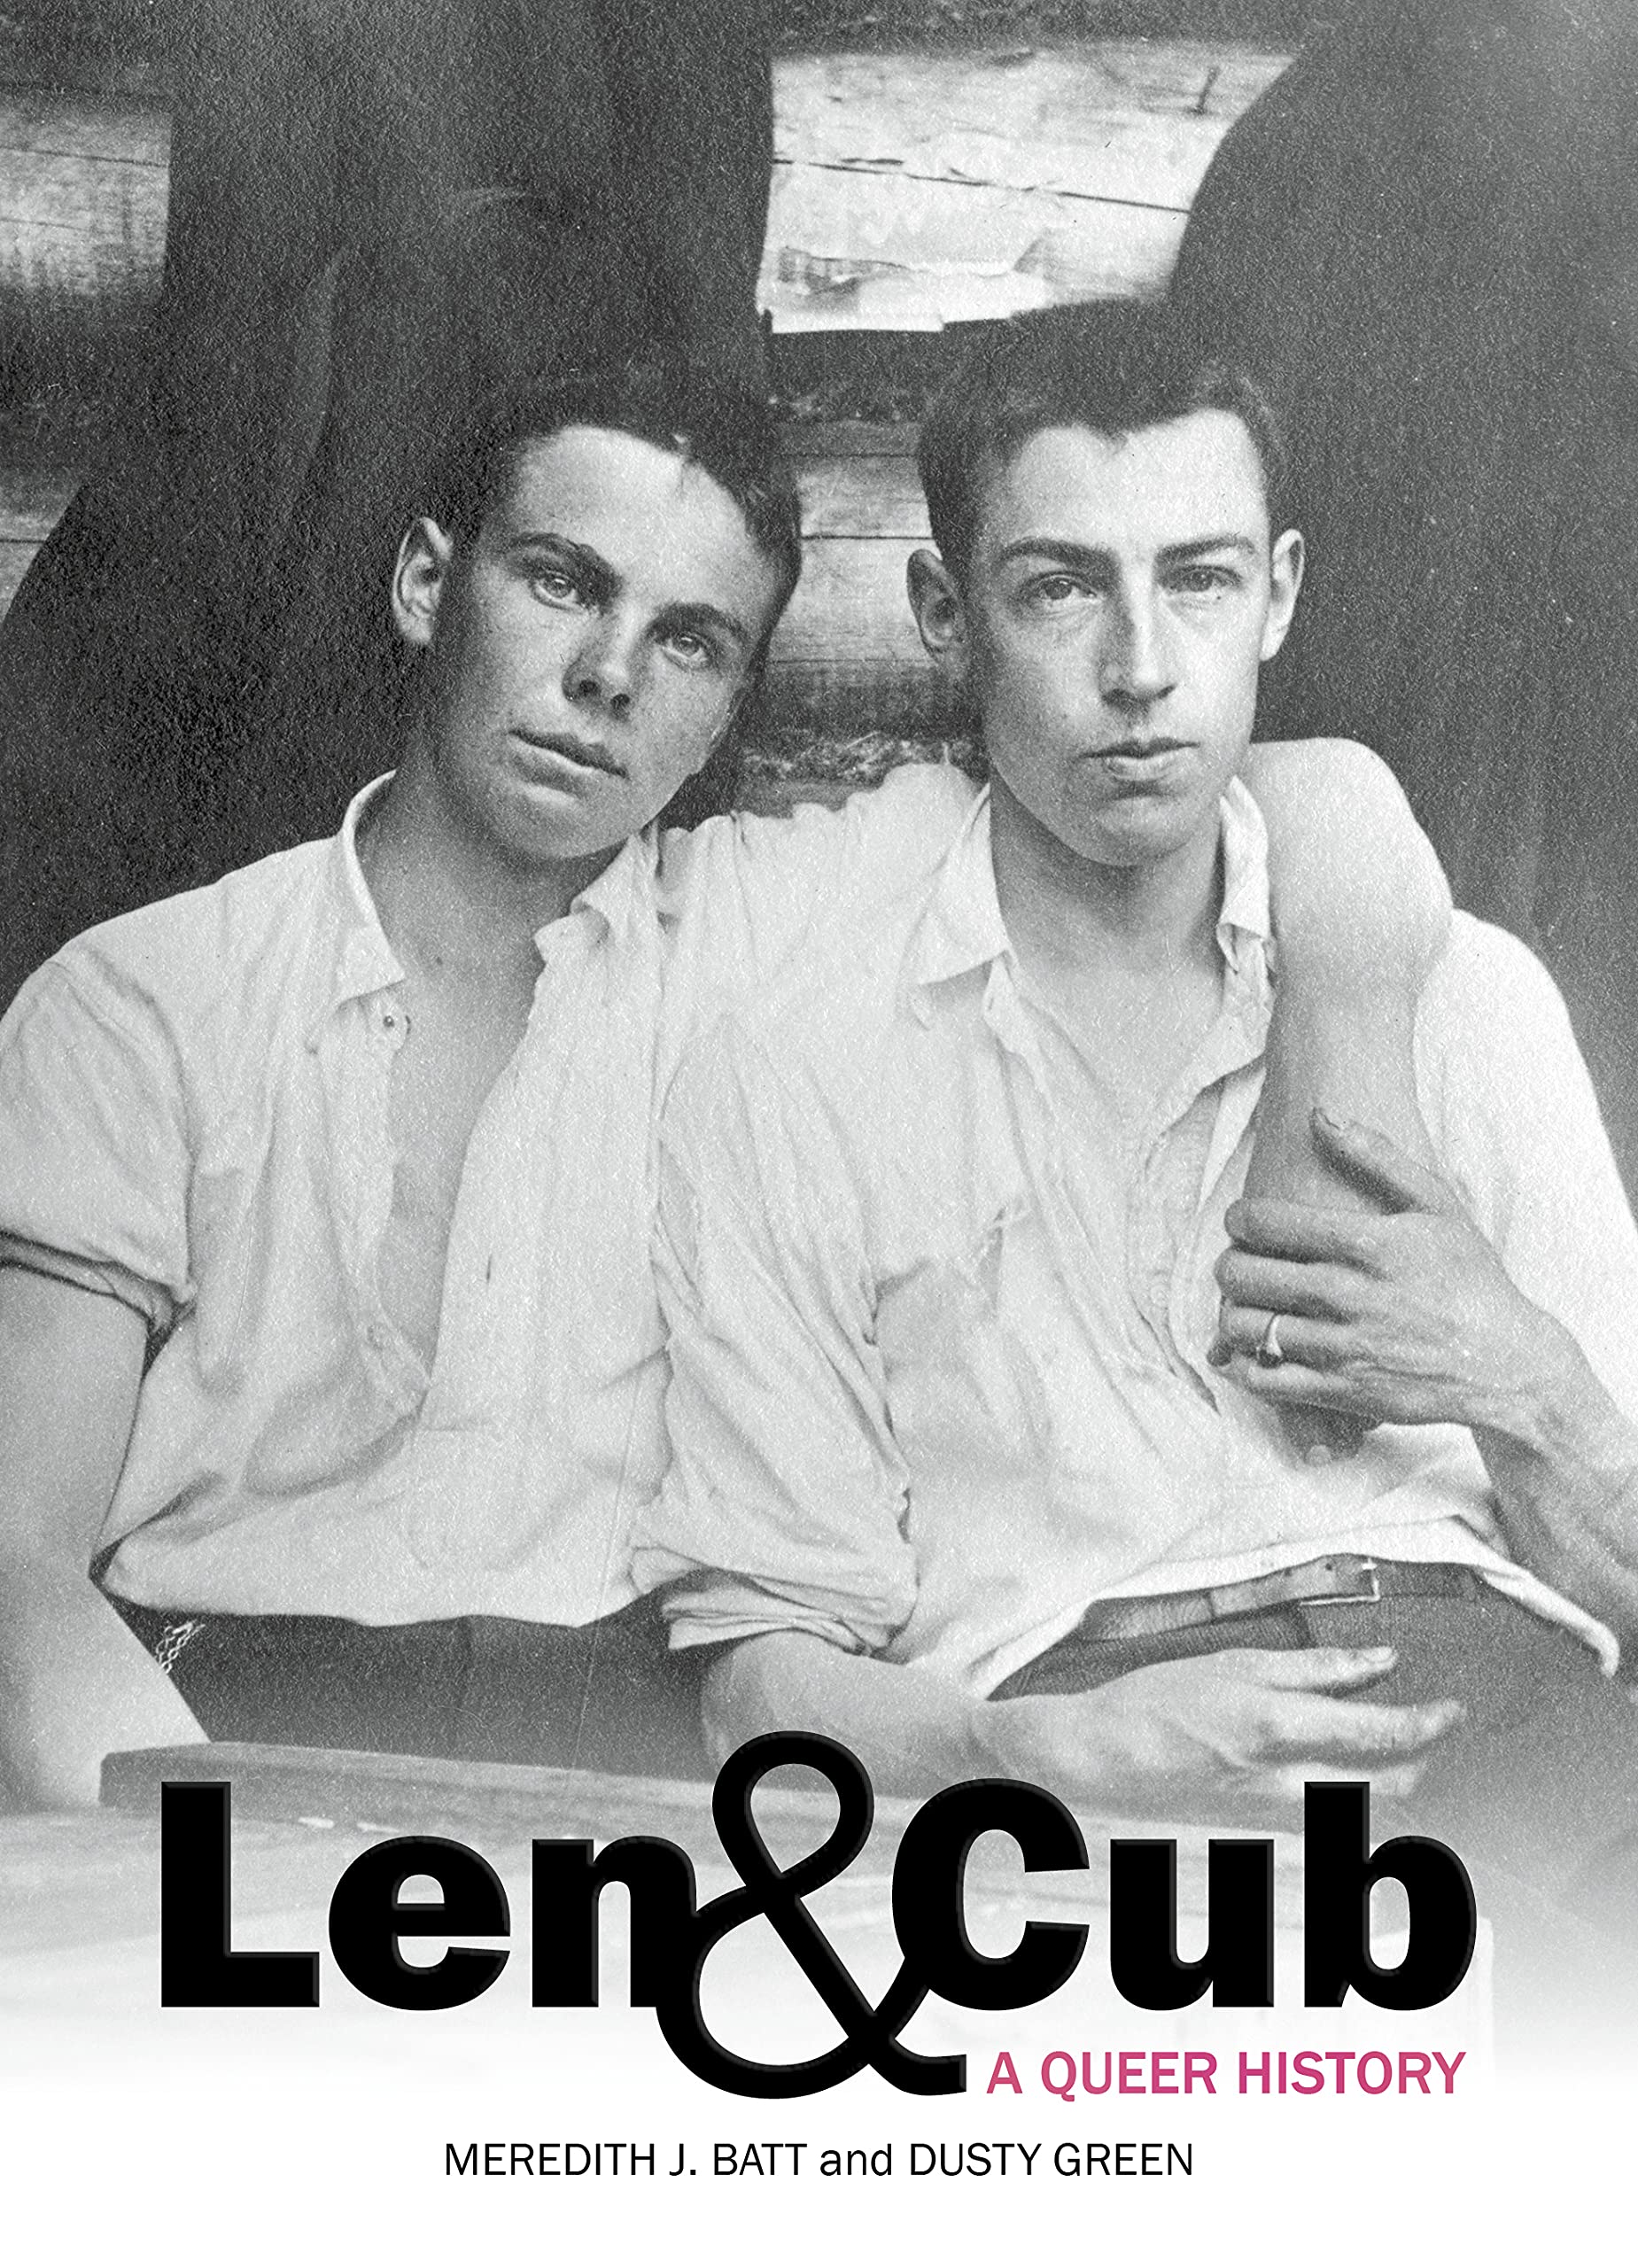 Cover of Len and Cub: A Queer History by Meredith J. Batt and Dusty Green